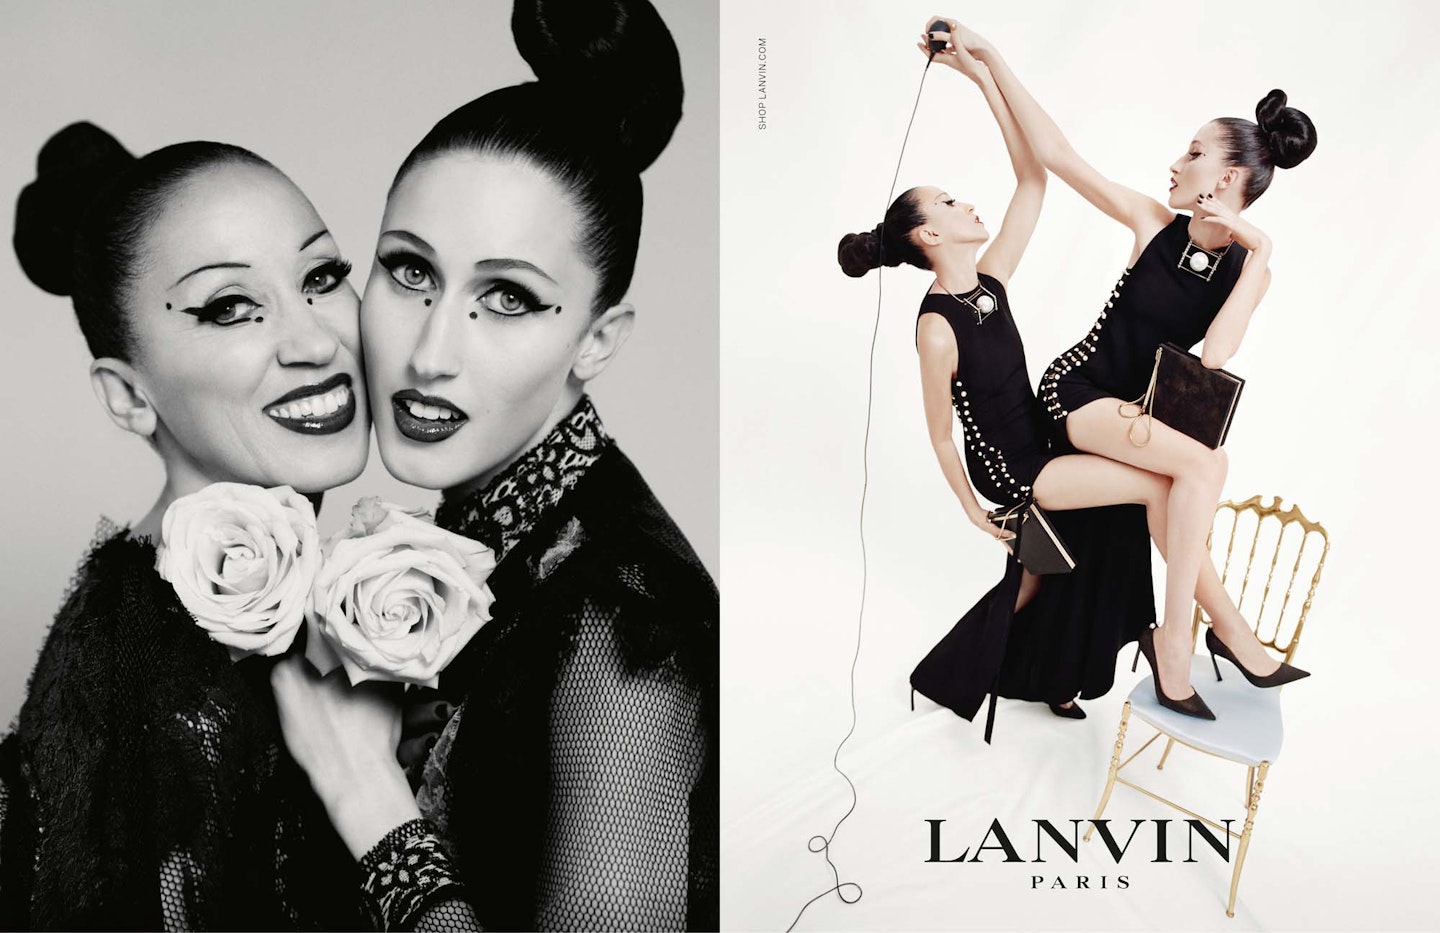 Pat Cleveland and Anna Cleveland from Lanvin's popular mothers and daughters spring/summer '15 campaign